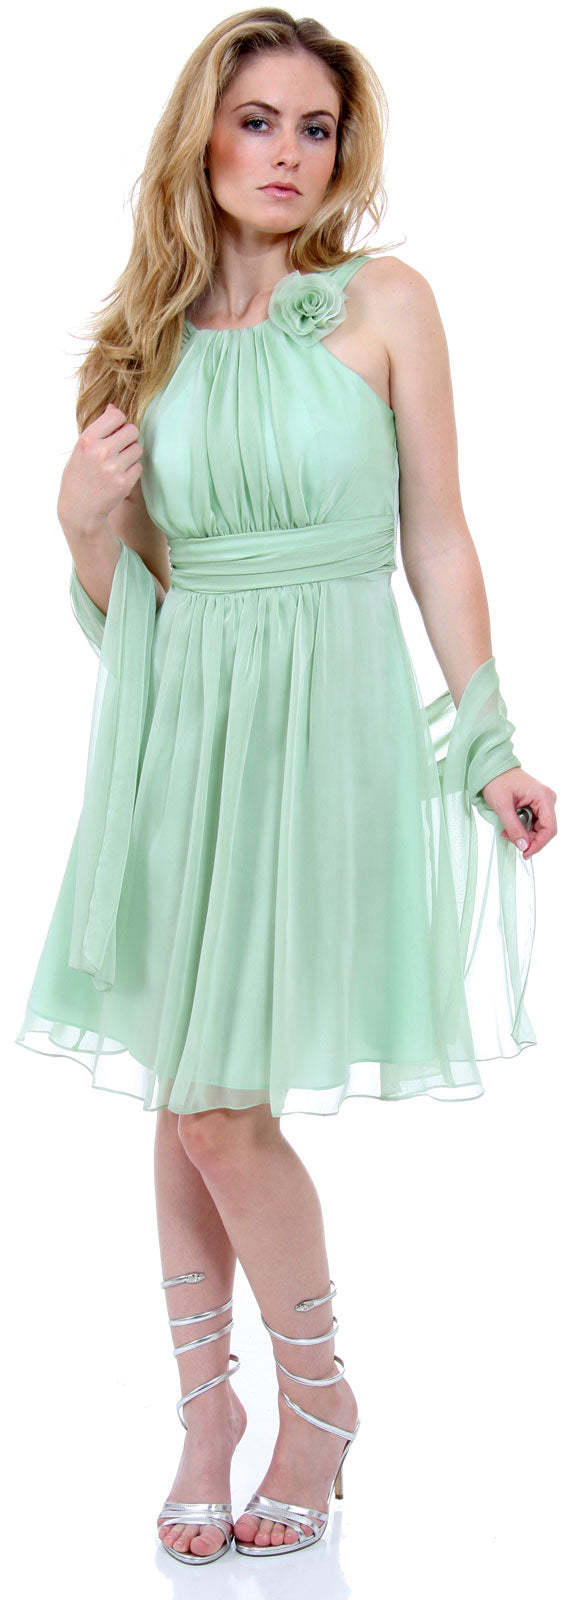 Image of Empire Cut Shirred Knee Length Bridesmaid Party Dress in sage alternative view.